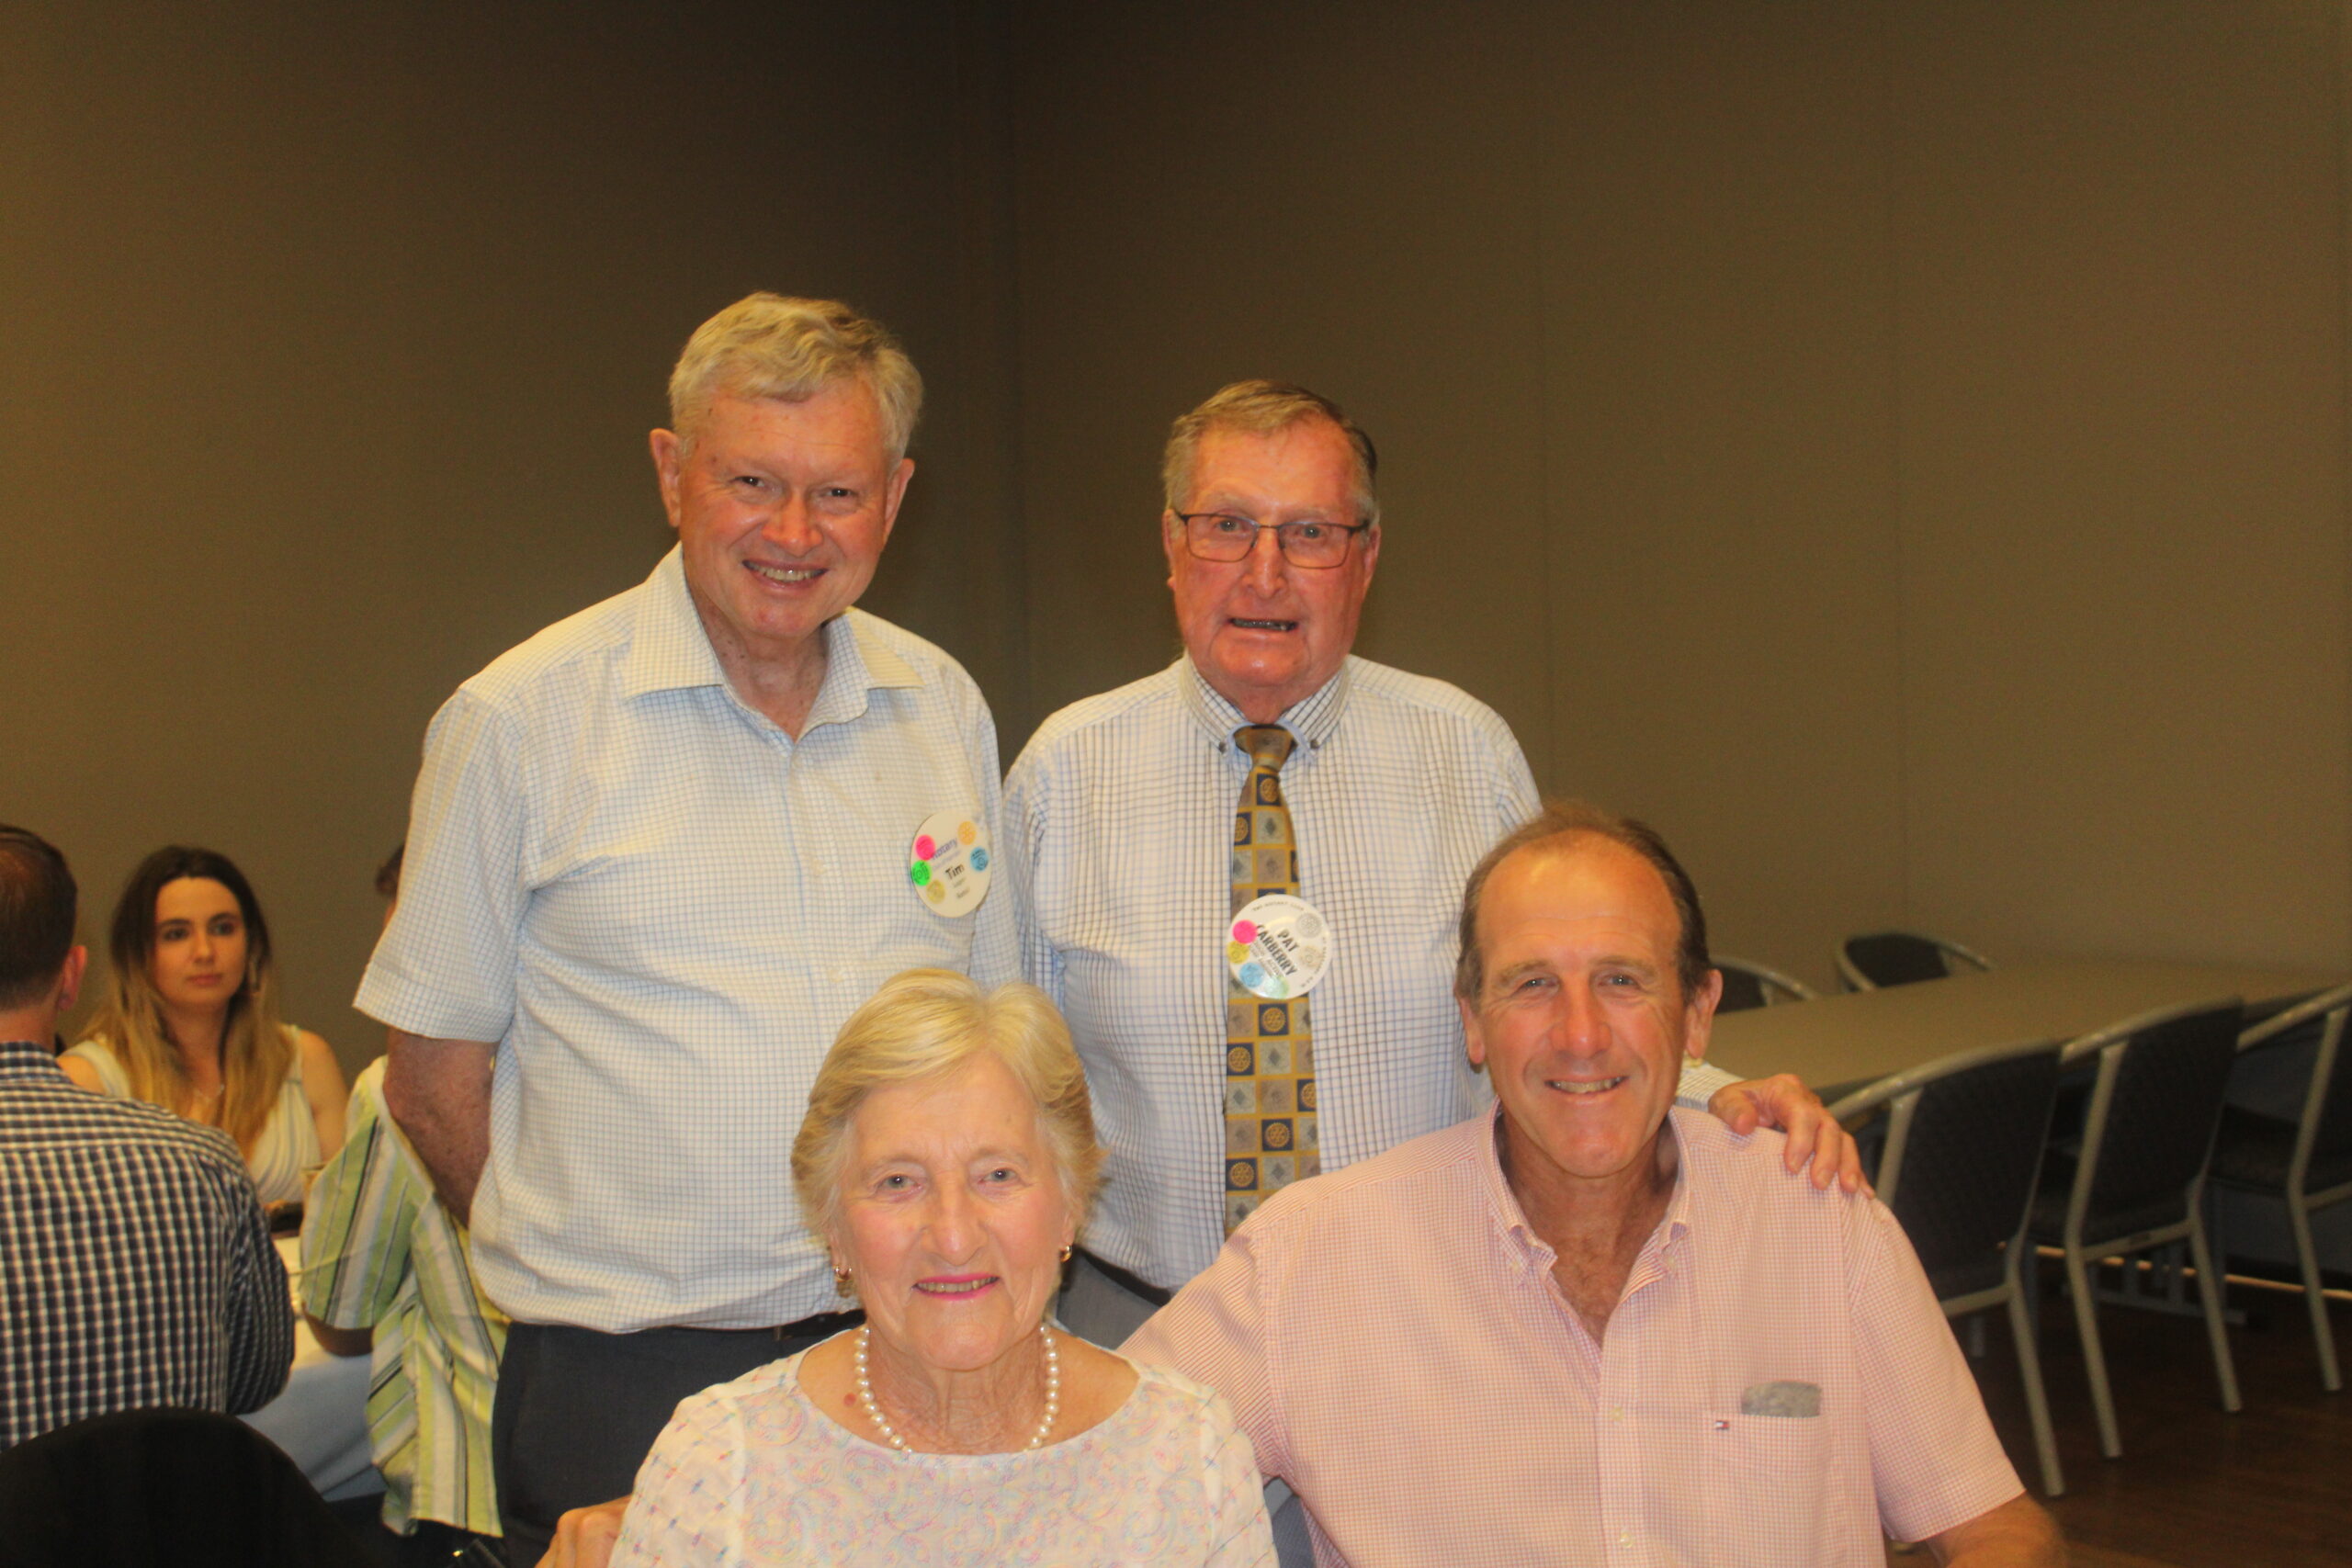 Back, Tim Logan, Pat Carberry, front Joan Burrell-Melbourne and Micheal Burrell.